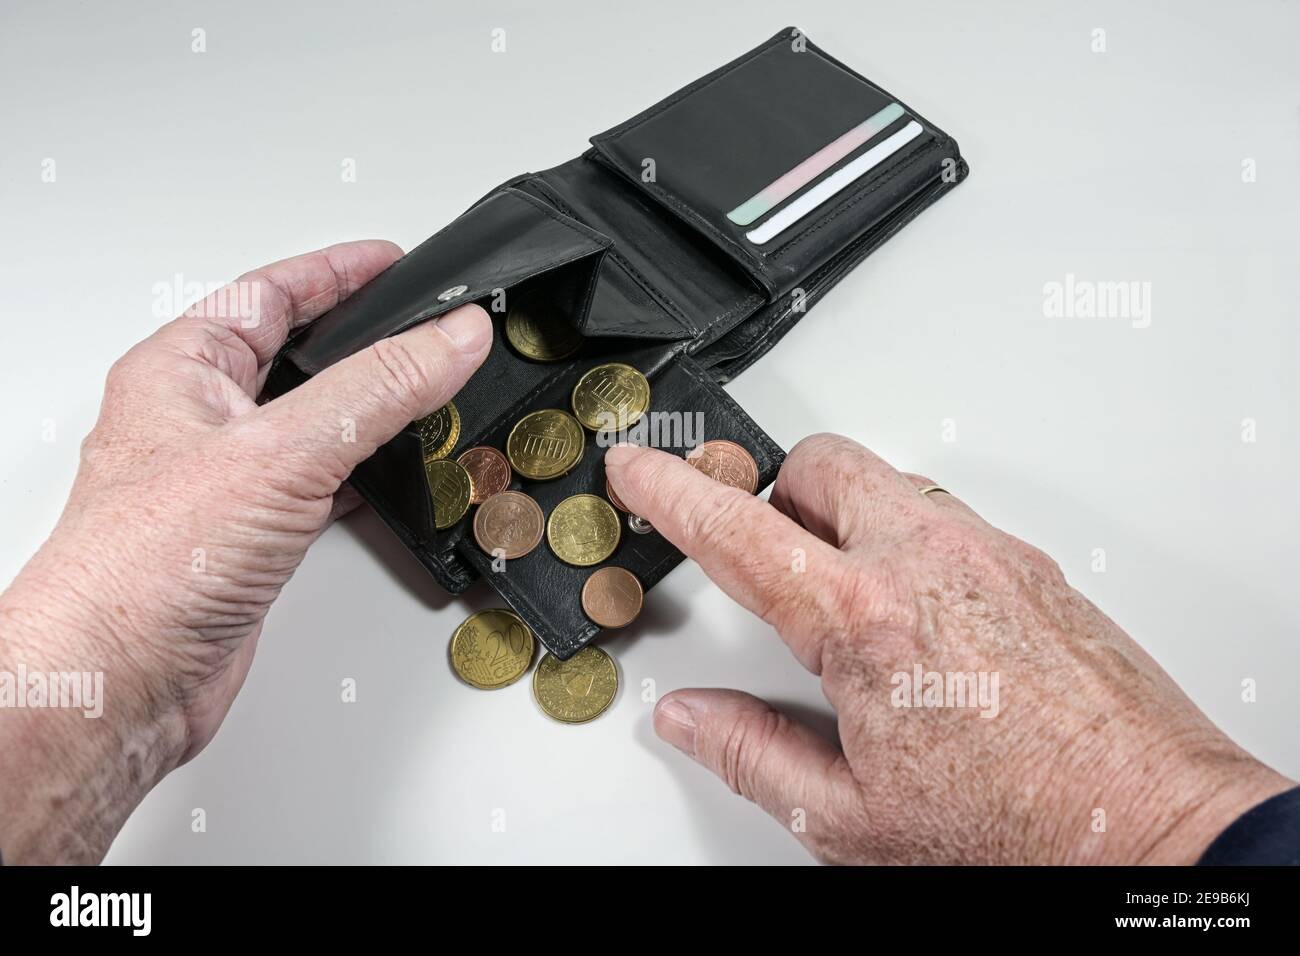 Elderly hands counting the few euro coins in a wallet, money concept for old age poverty and financial crisis, light gray background, selected focus, Stock Photo